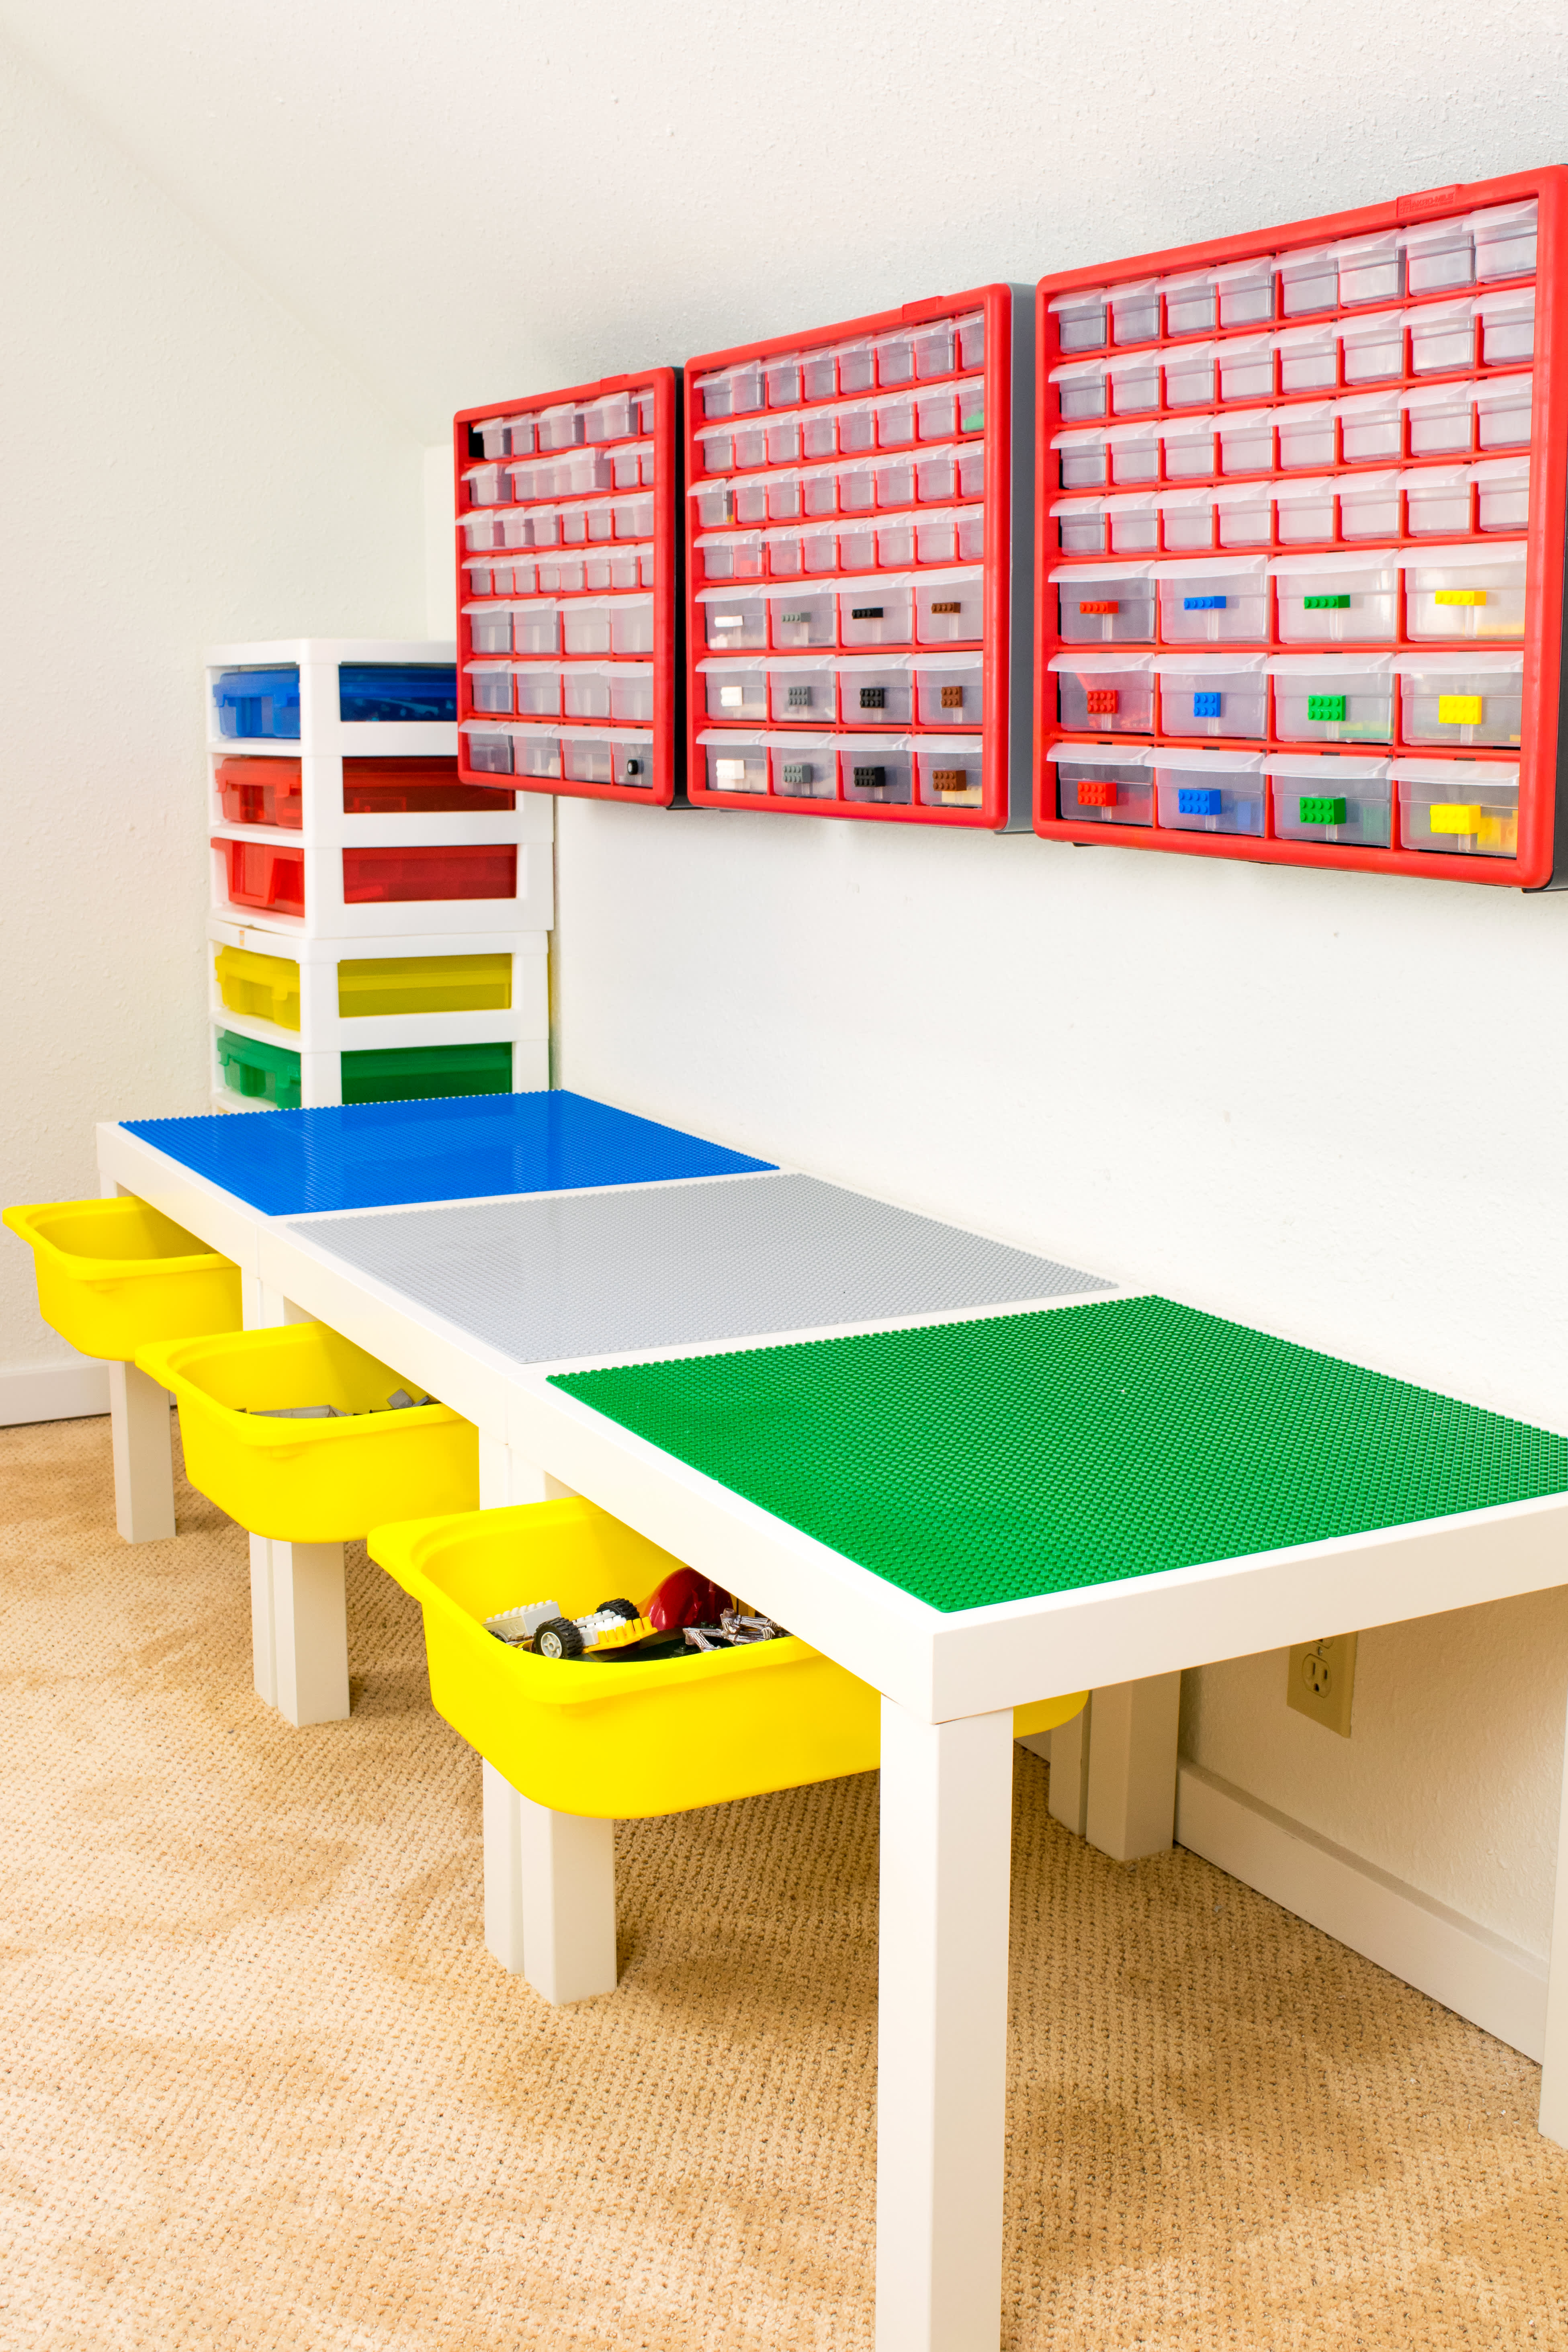 6 Clever Lego Storage Ideas - Get Those Pieces Sorted!